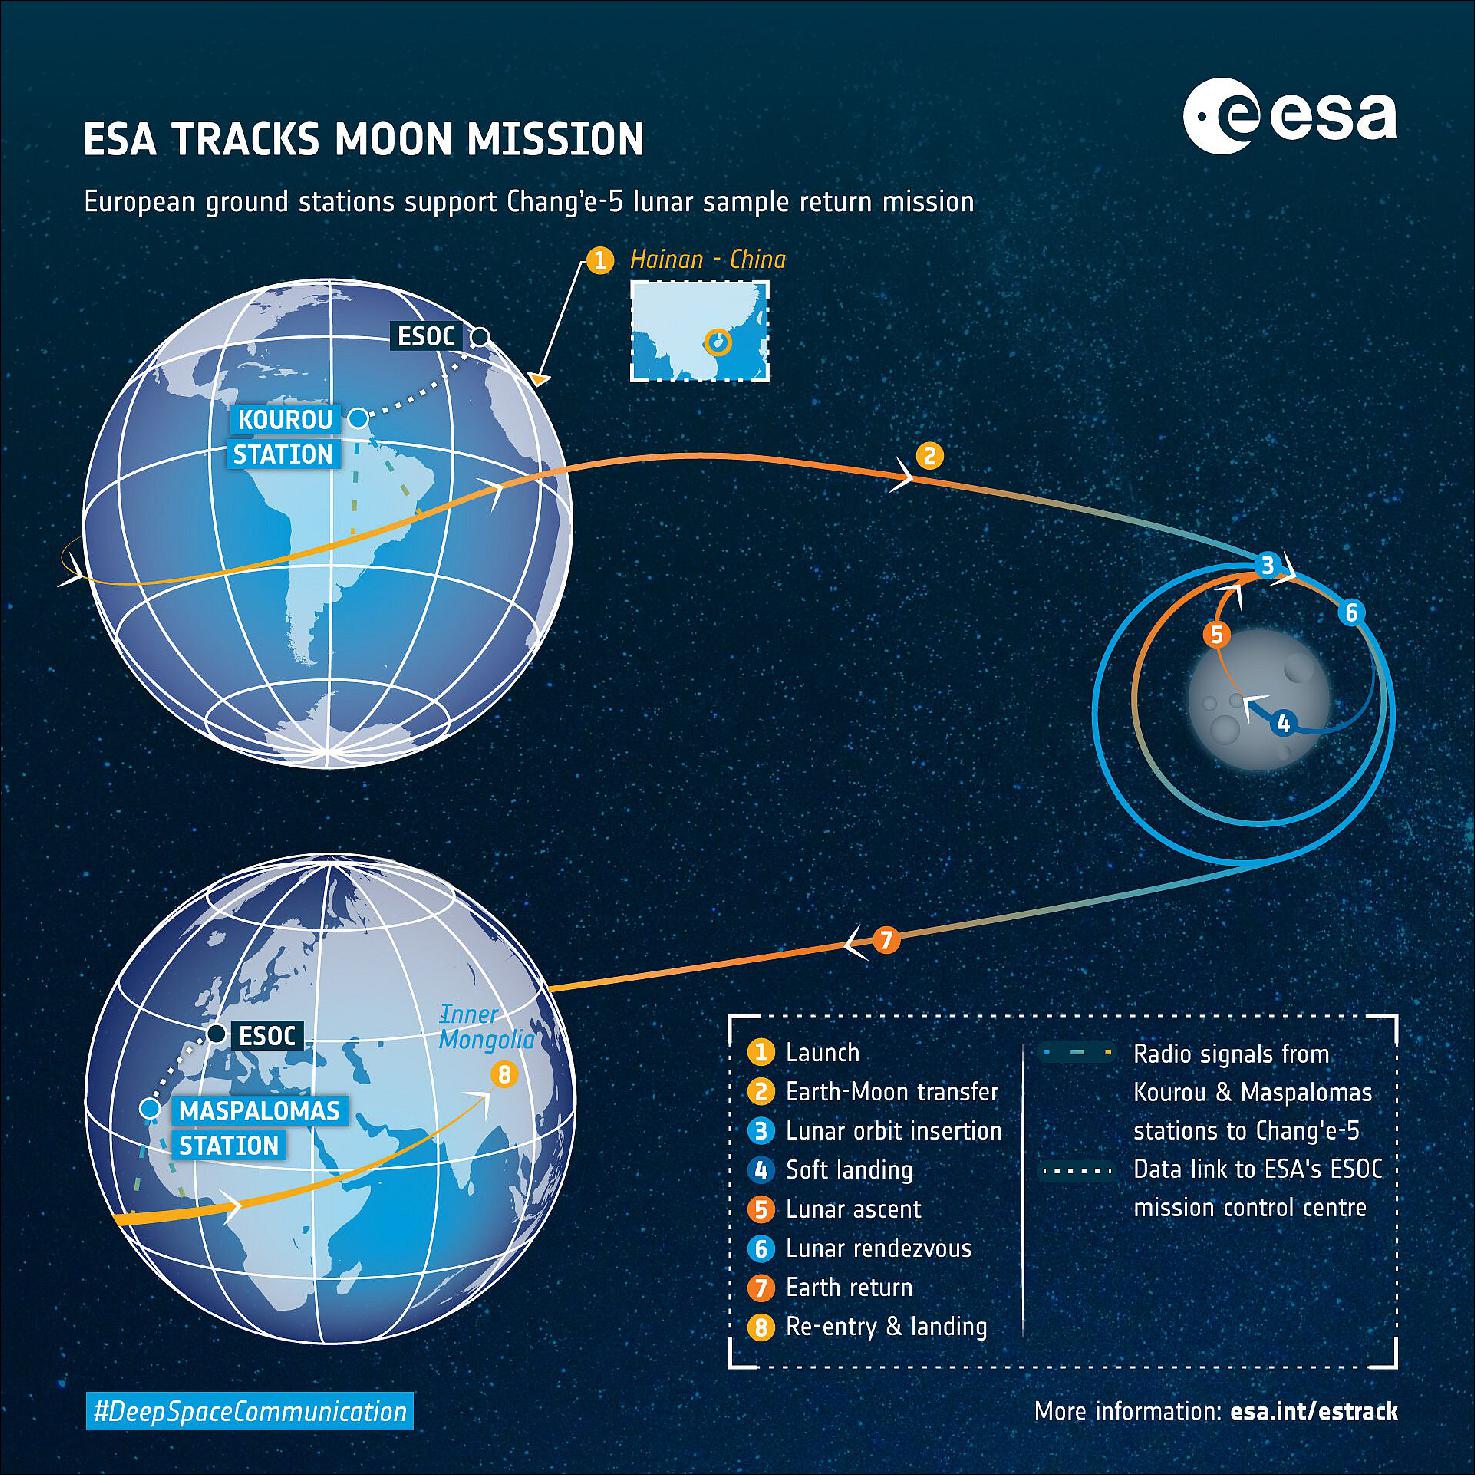 Figure 8: ESA tracks Chang'e-5 Moon mission. Around 15 December, as the spacecraft returns to Earth, ESA will catch signals from the spacecraft using the Maspalomas station, operated by the Instituto Nacional de Tecnica Aerospacial (INTA) in Spain (image credit: ESA)